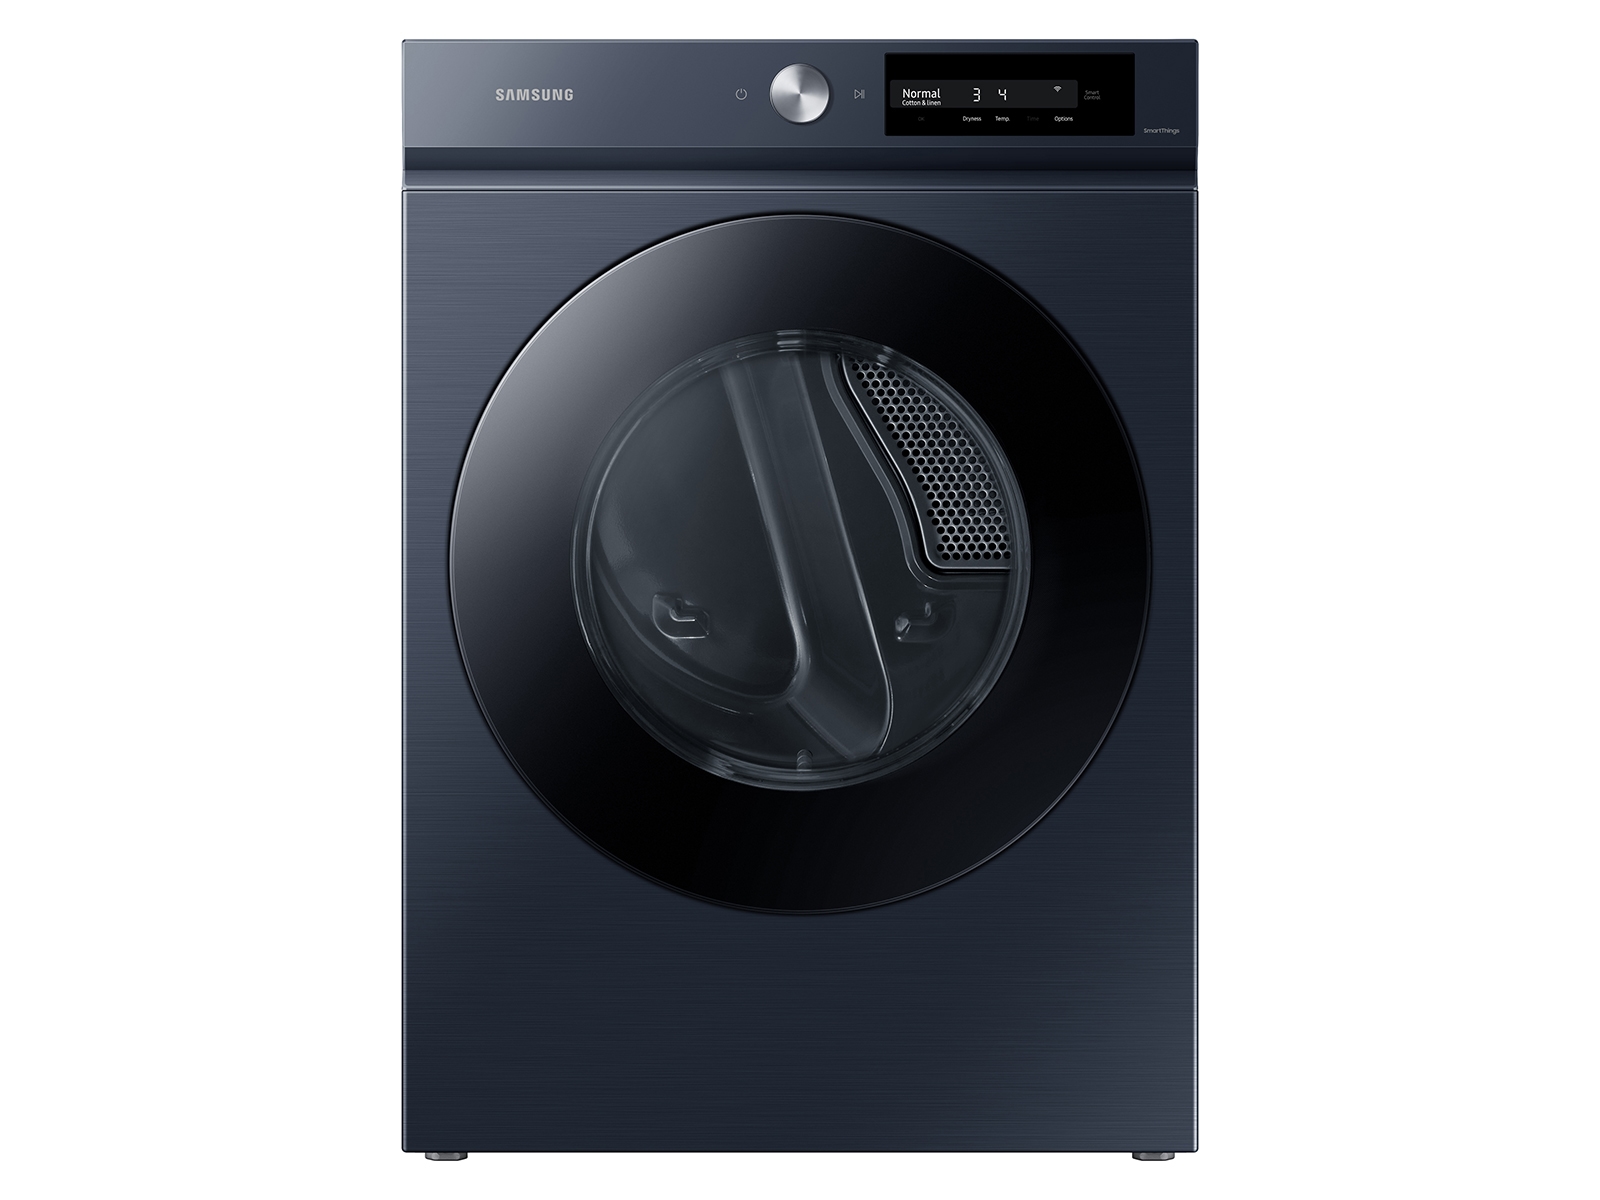 Photos - Tumble Dryer Samsung Bespoke 7.5 cu. ft. Large Capacity Electric Dryer with Super Speed 